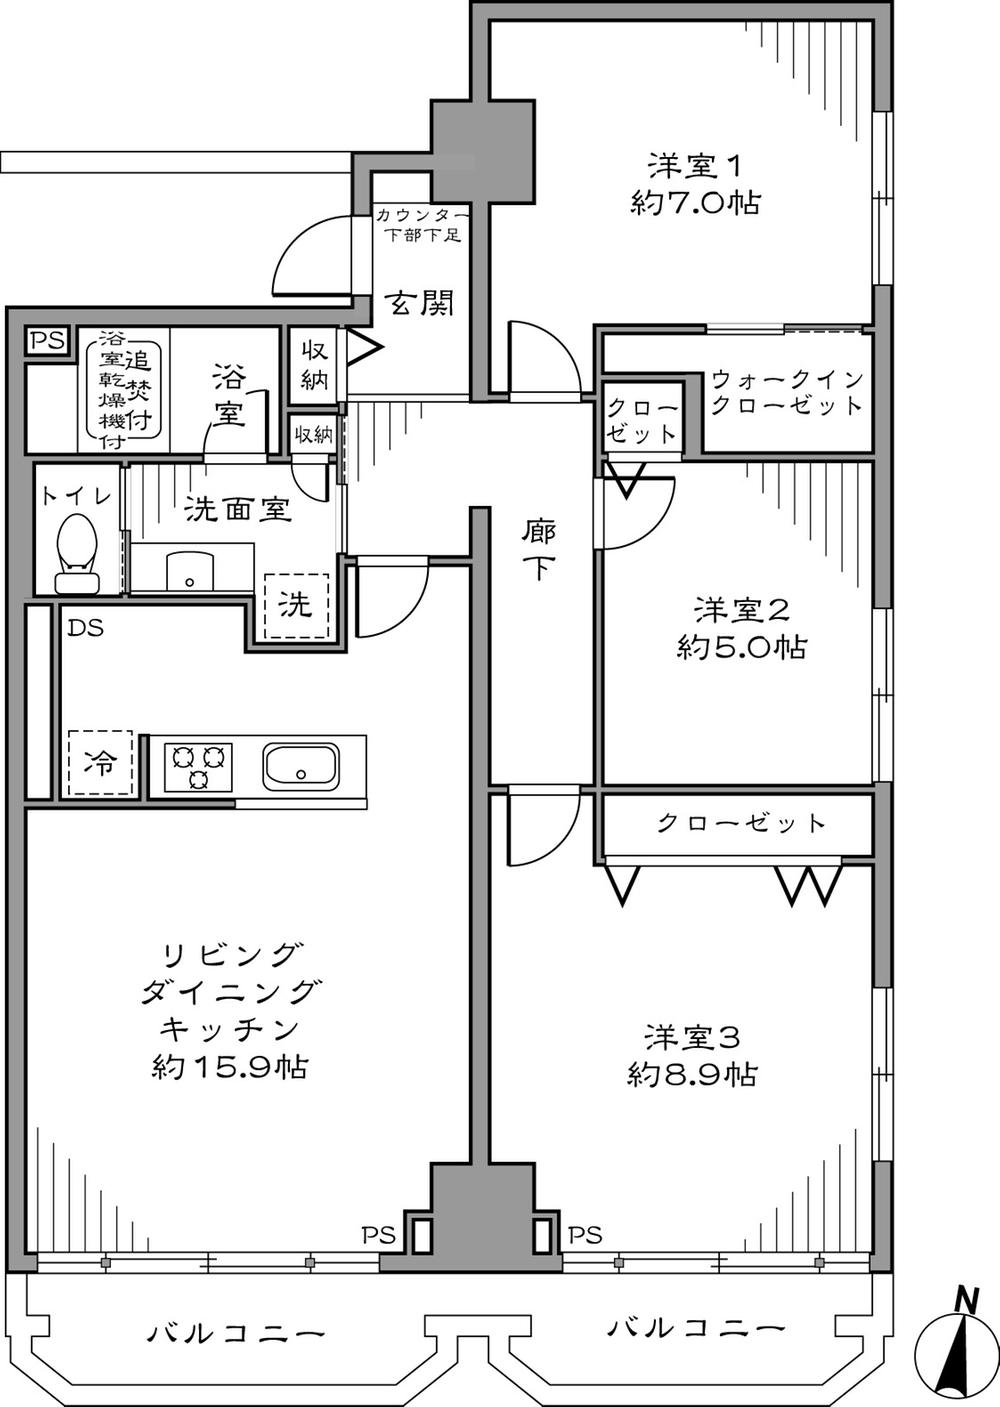 Floor plan. 3LDK, Price 39,800,000 yen, Occupied area 81.33 sq m , Good floor plan in 3LDK balcony area 8 sq m footprint 81.33 sq m is with a space!